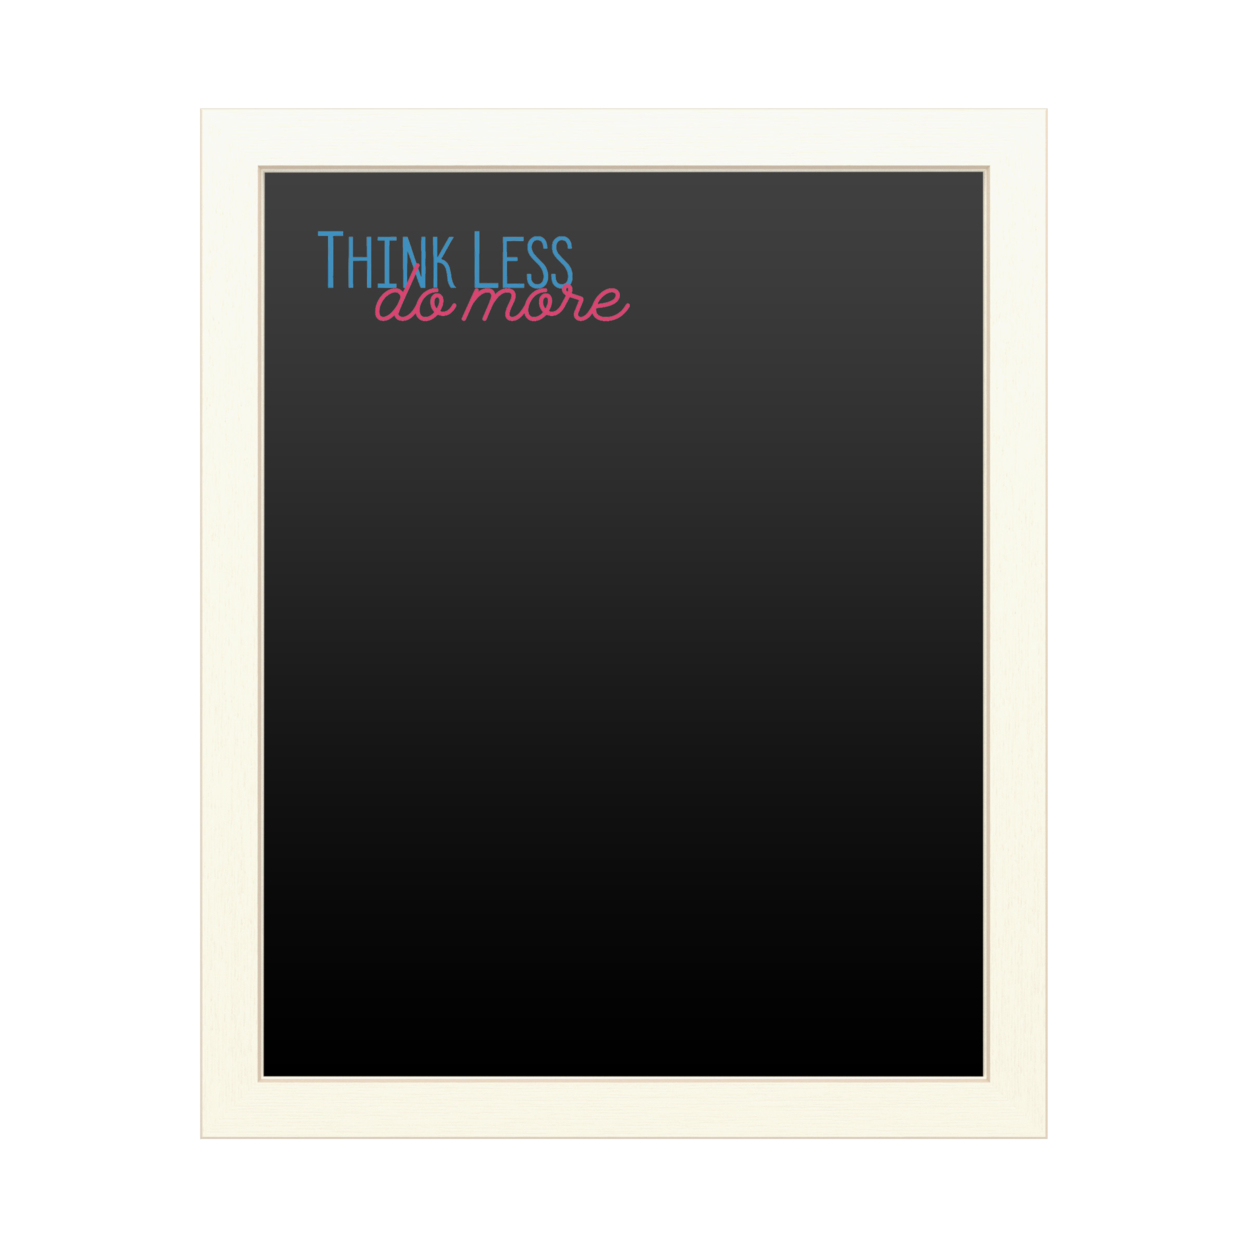 16 X 20 Chalk Board With Printed Artwork - Think Less Do More 2 White Board - Ready To Hang Chalkboard